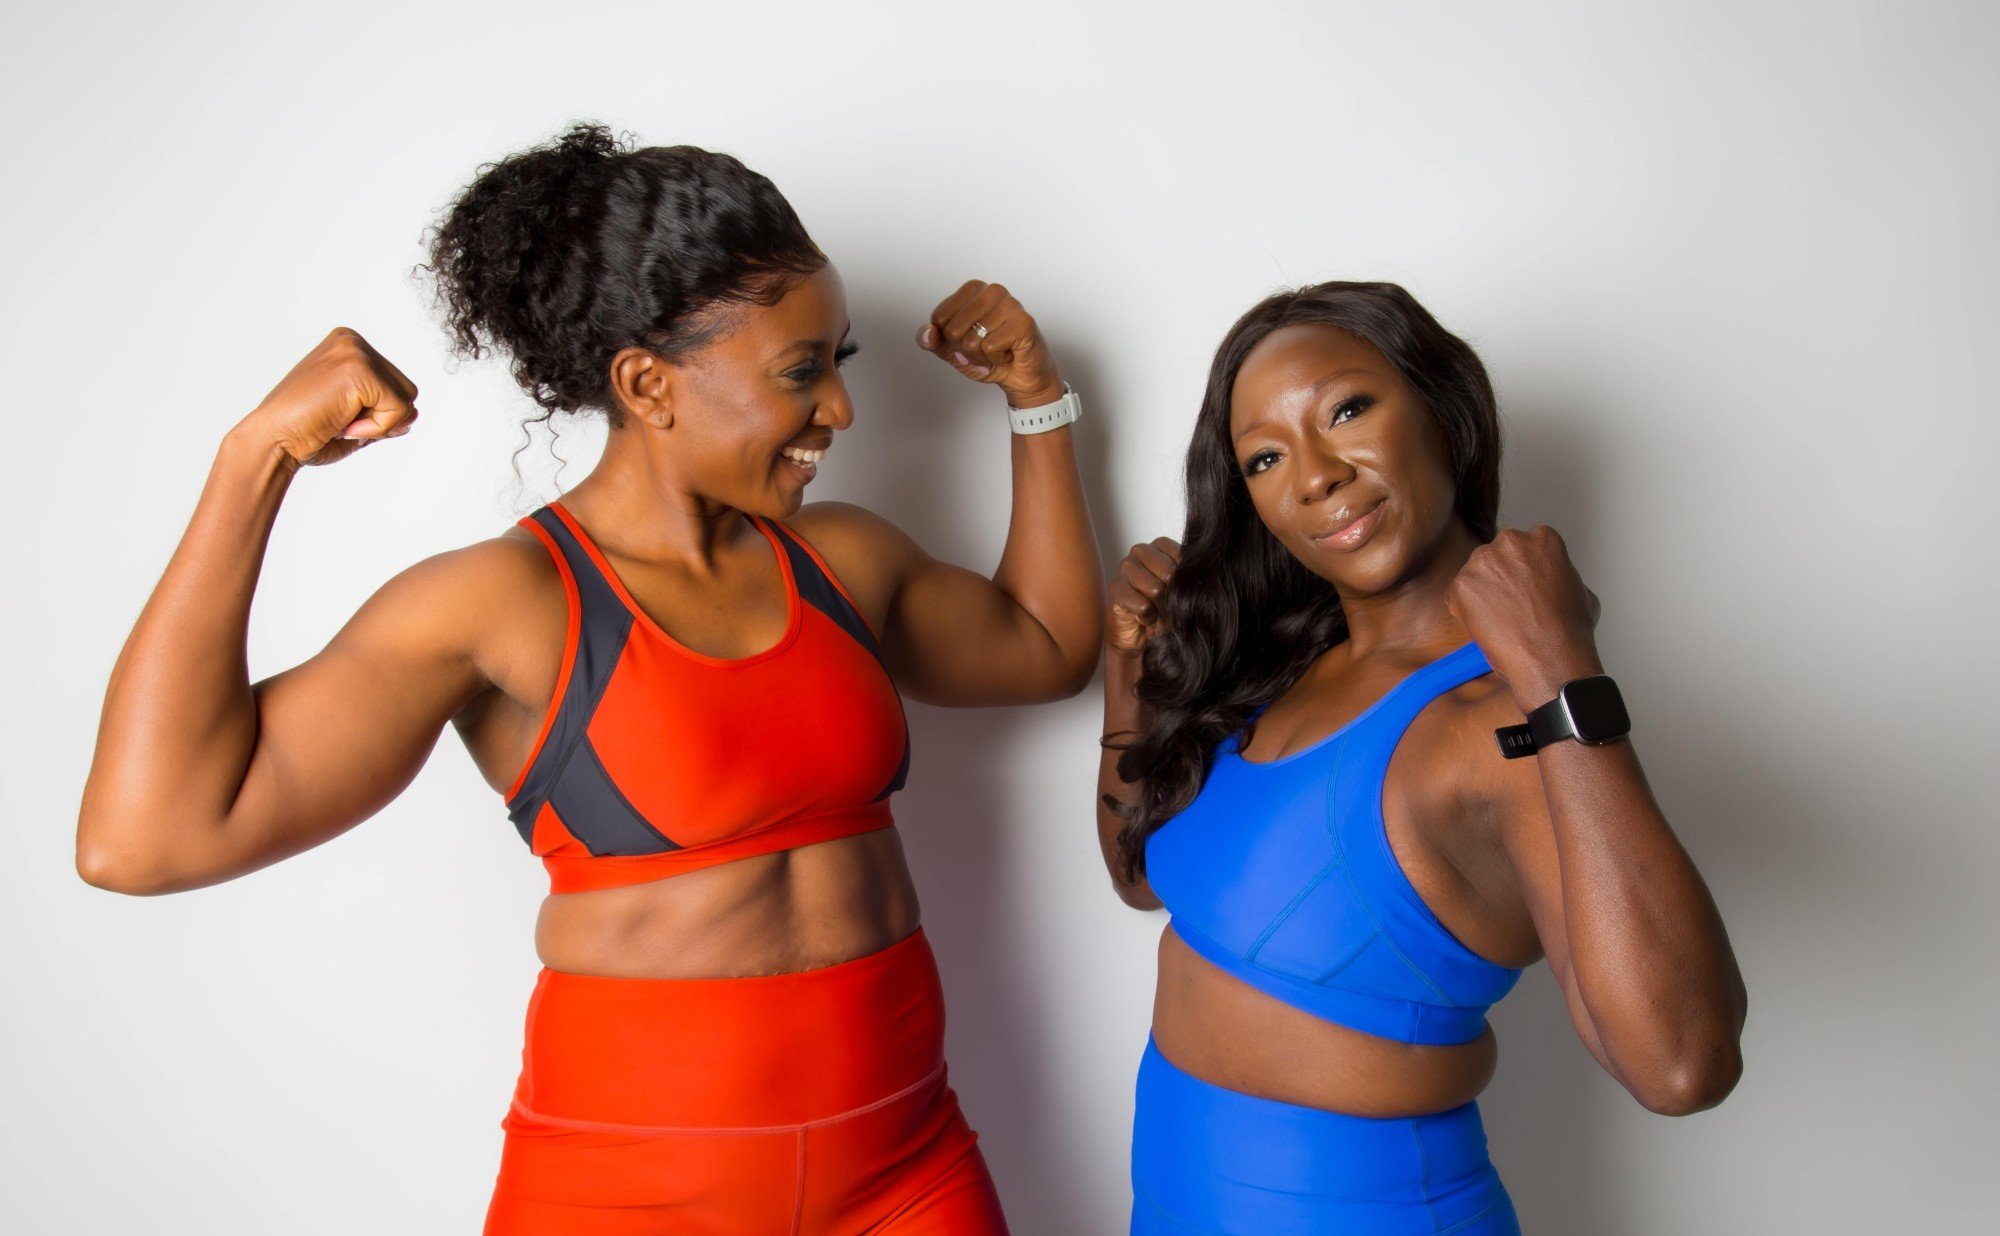 Two women happily flexing their muscles after a workout